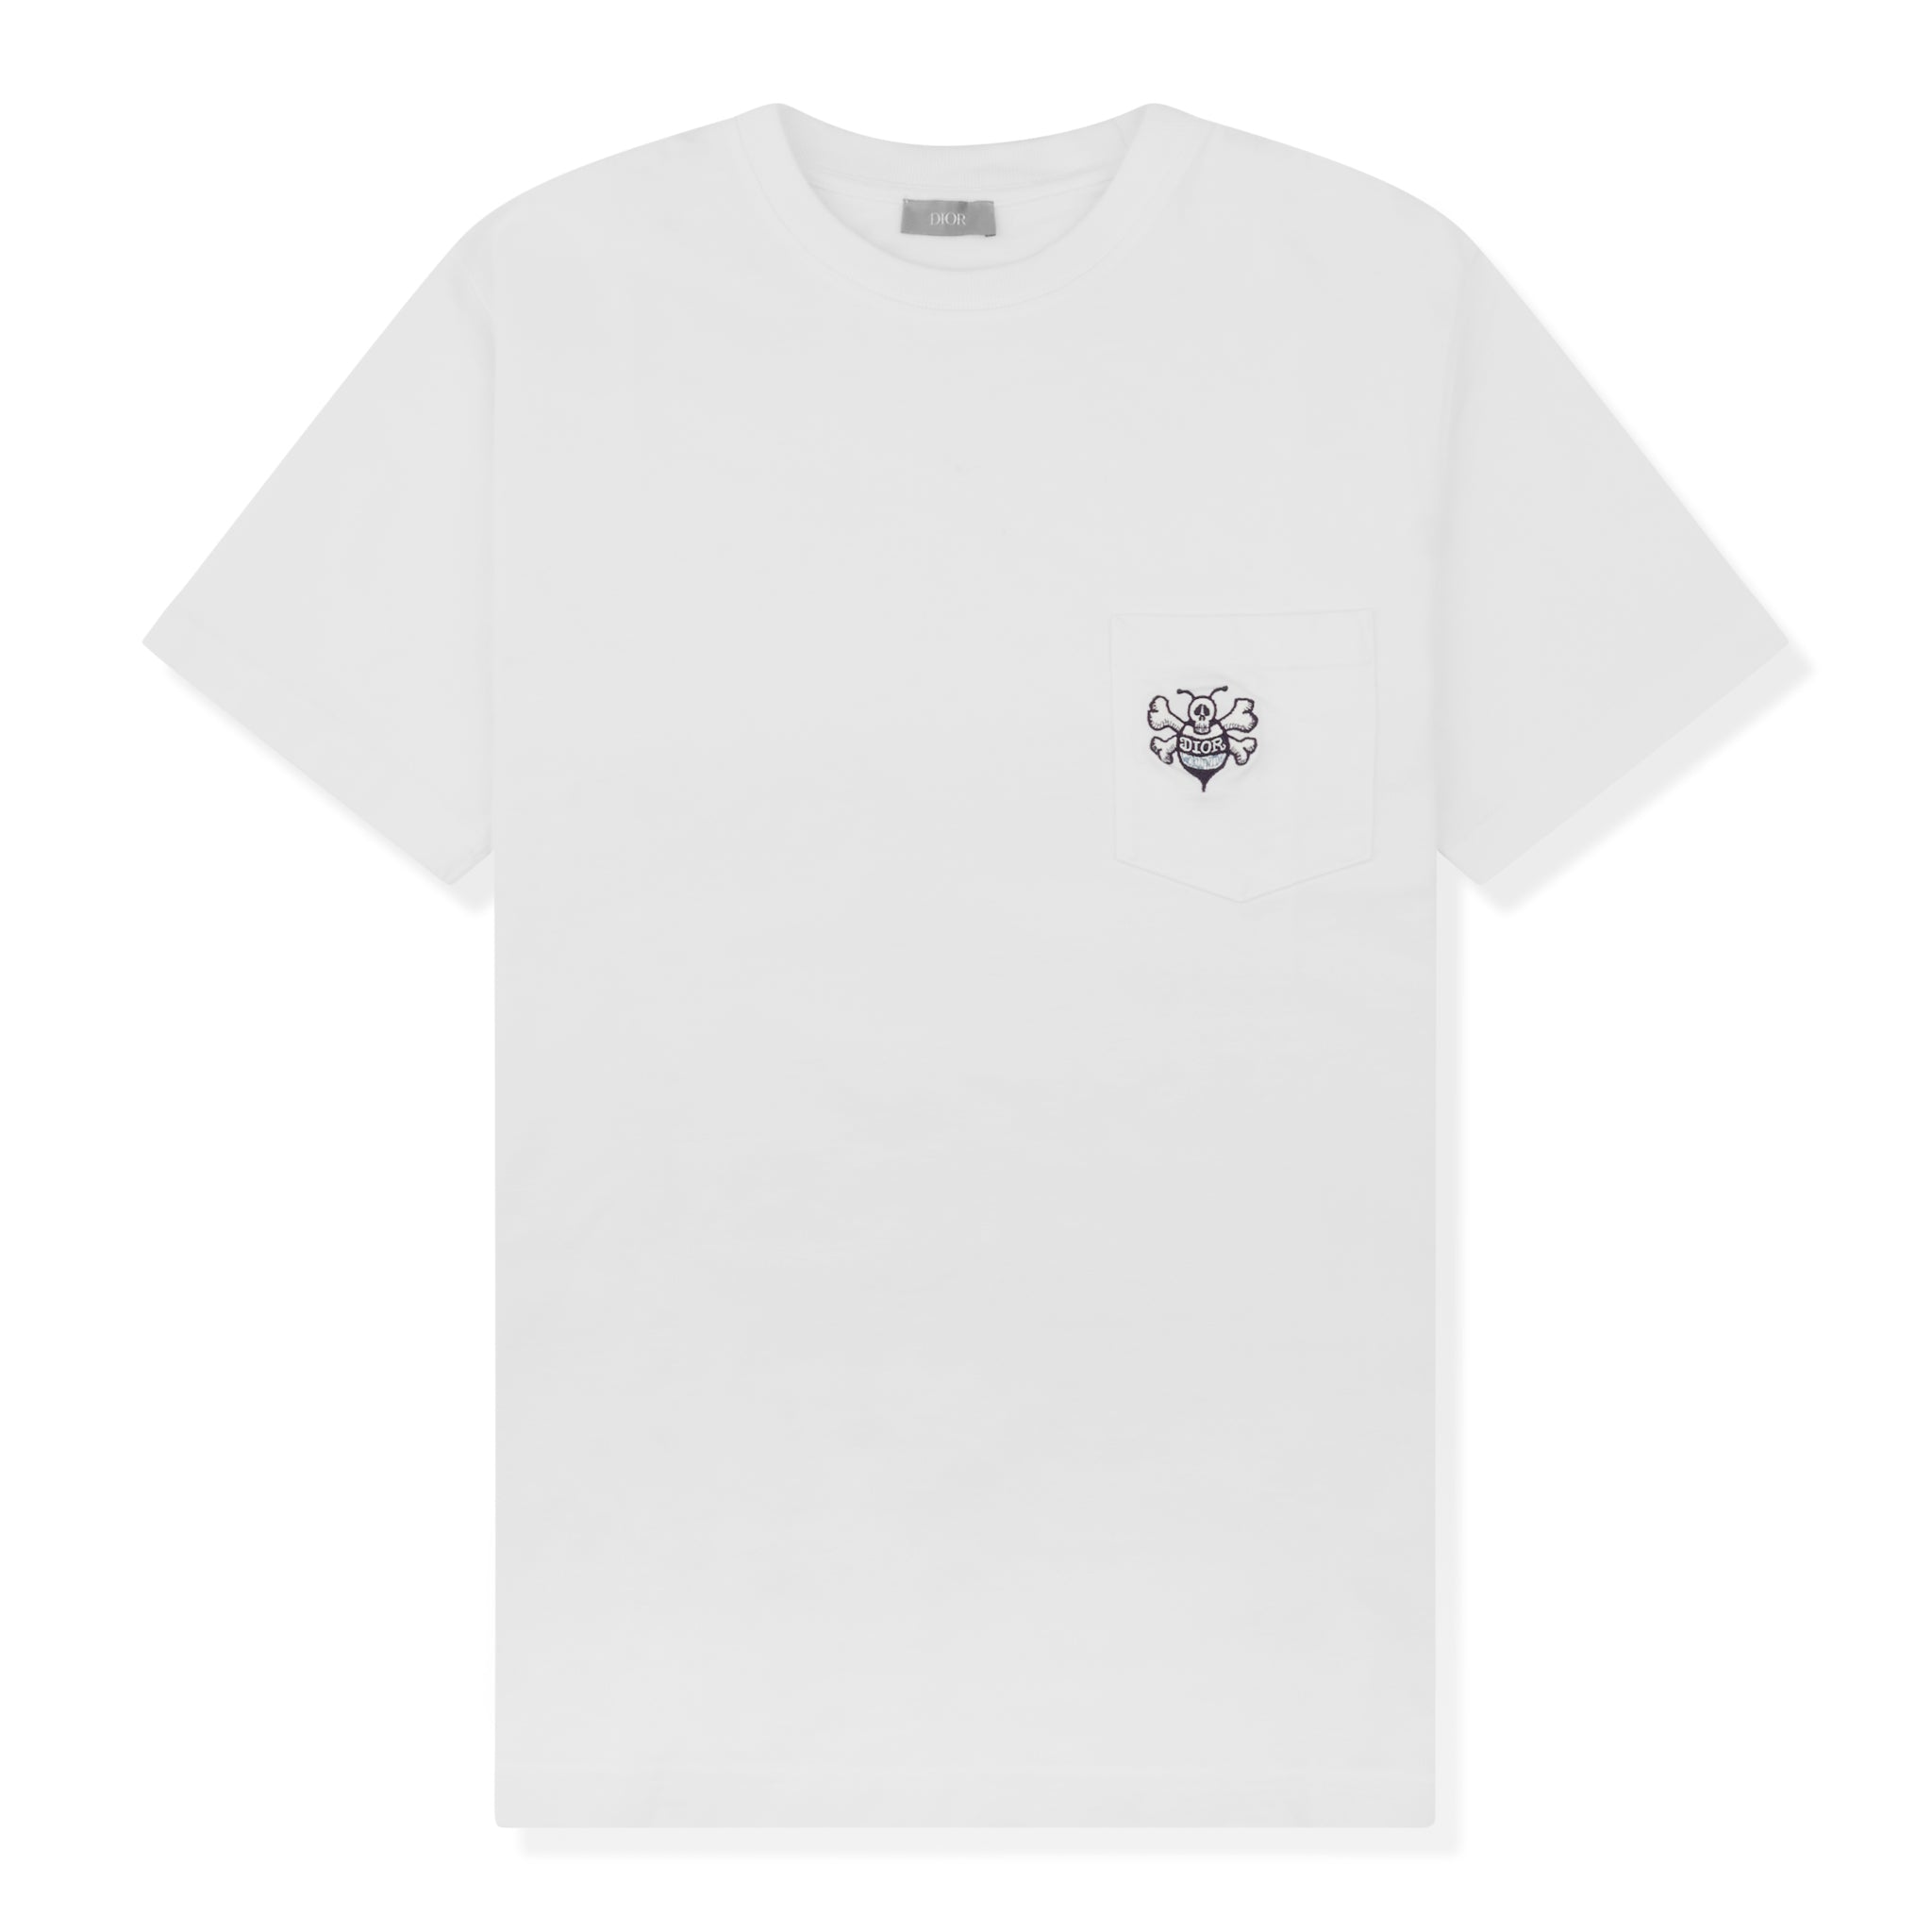 Image of Pre Owned - Dior x Shawn Stussy Bee Pocket Oversized White T Shirt